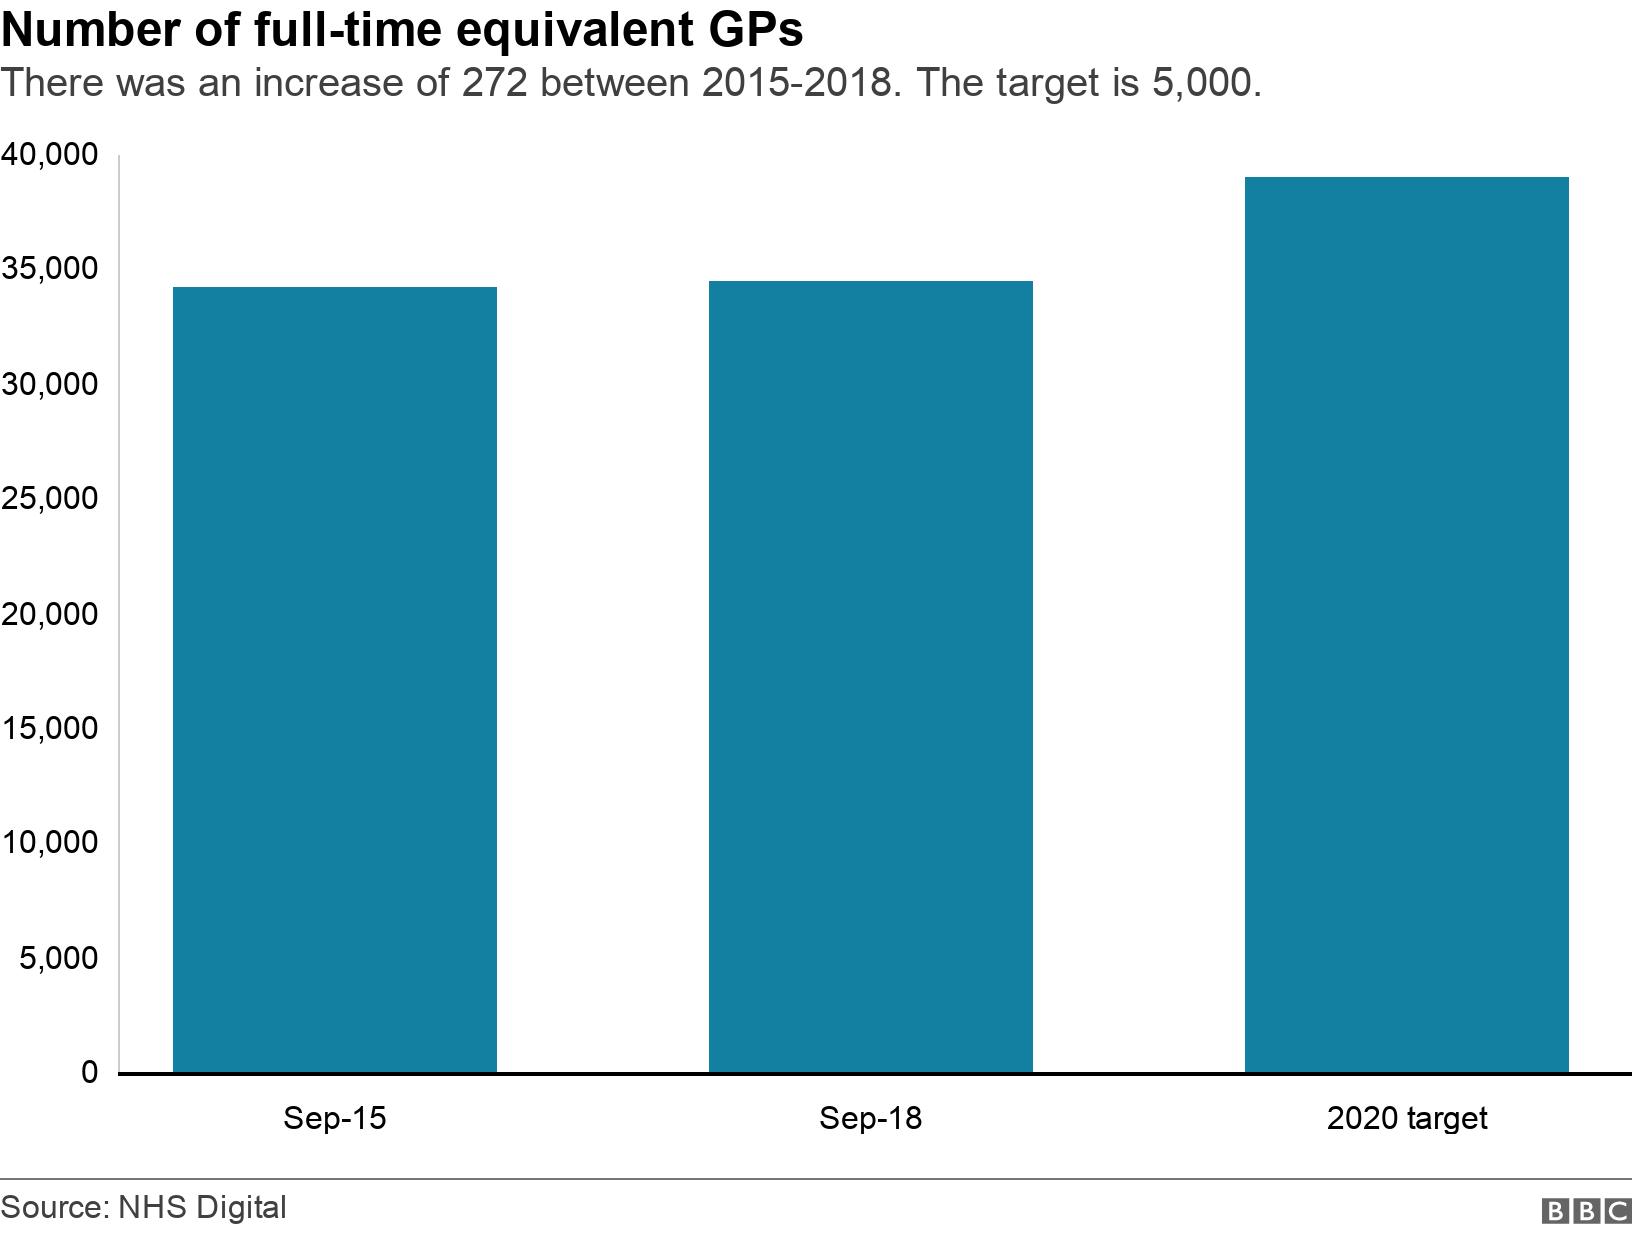 Number of full-time equivalent GPs. There was an increase of 272 between 2015-2018. The target is 5,000.. In September 2015, there were 34,262 full-time equivalent GPs (based on the latest revised figures). However, by September 2018 (the most recent comparable month) there were about 34,534 full-time equivalent GPs in post. For the government&#39;s target to be met there would need to be about 39,000 GPs in place by 2020. .